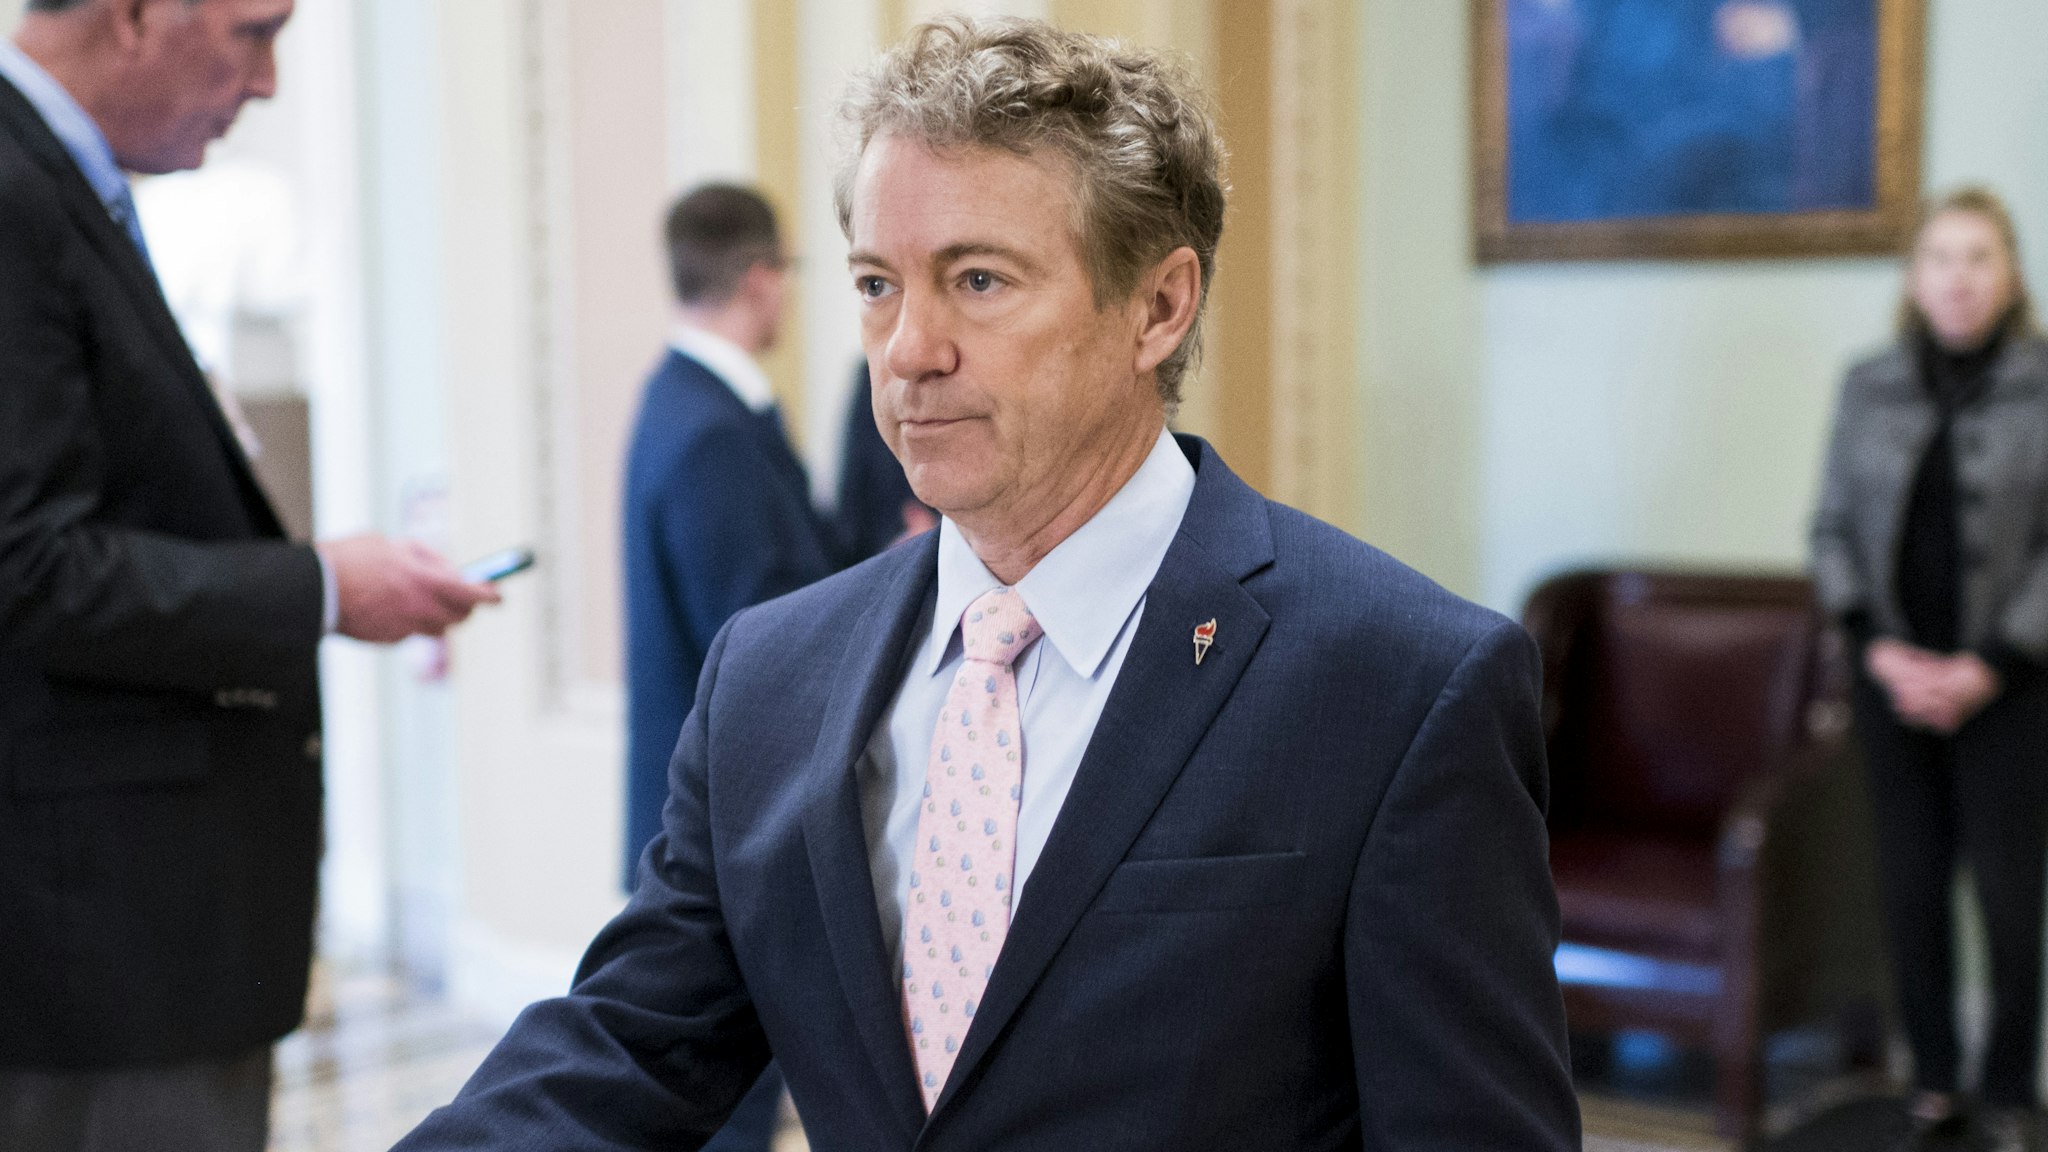 Sen. Rand Paul, R-Ky., leaves the Senate floor after a vote in the Capitol on Wednesday, Oct. 30, 2019.